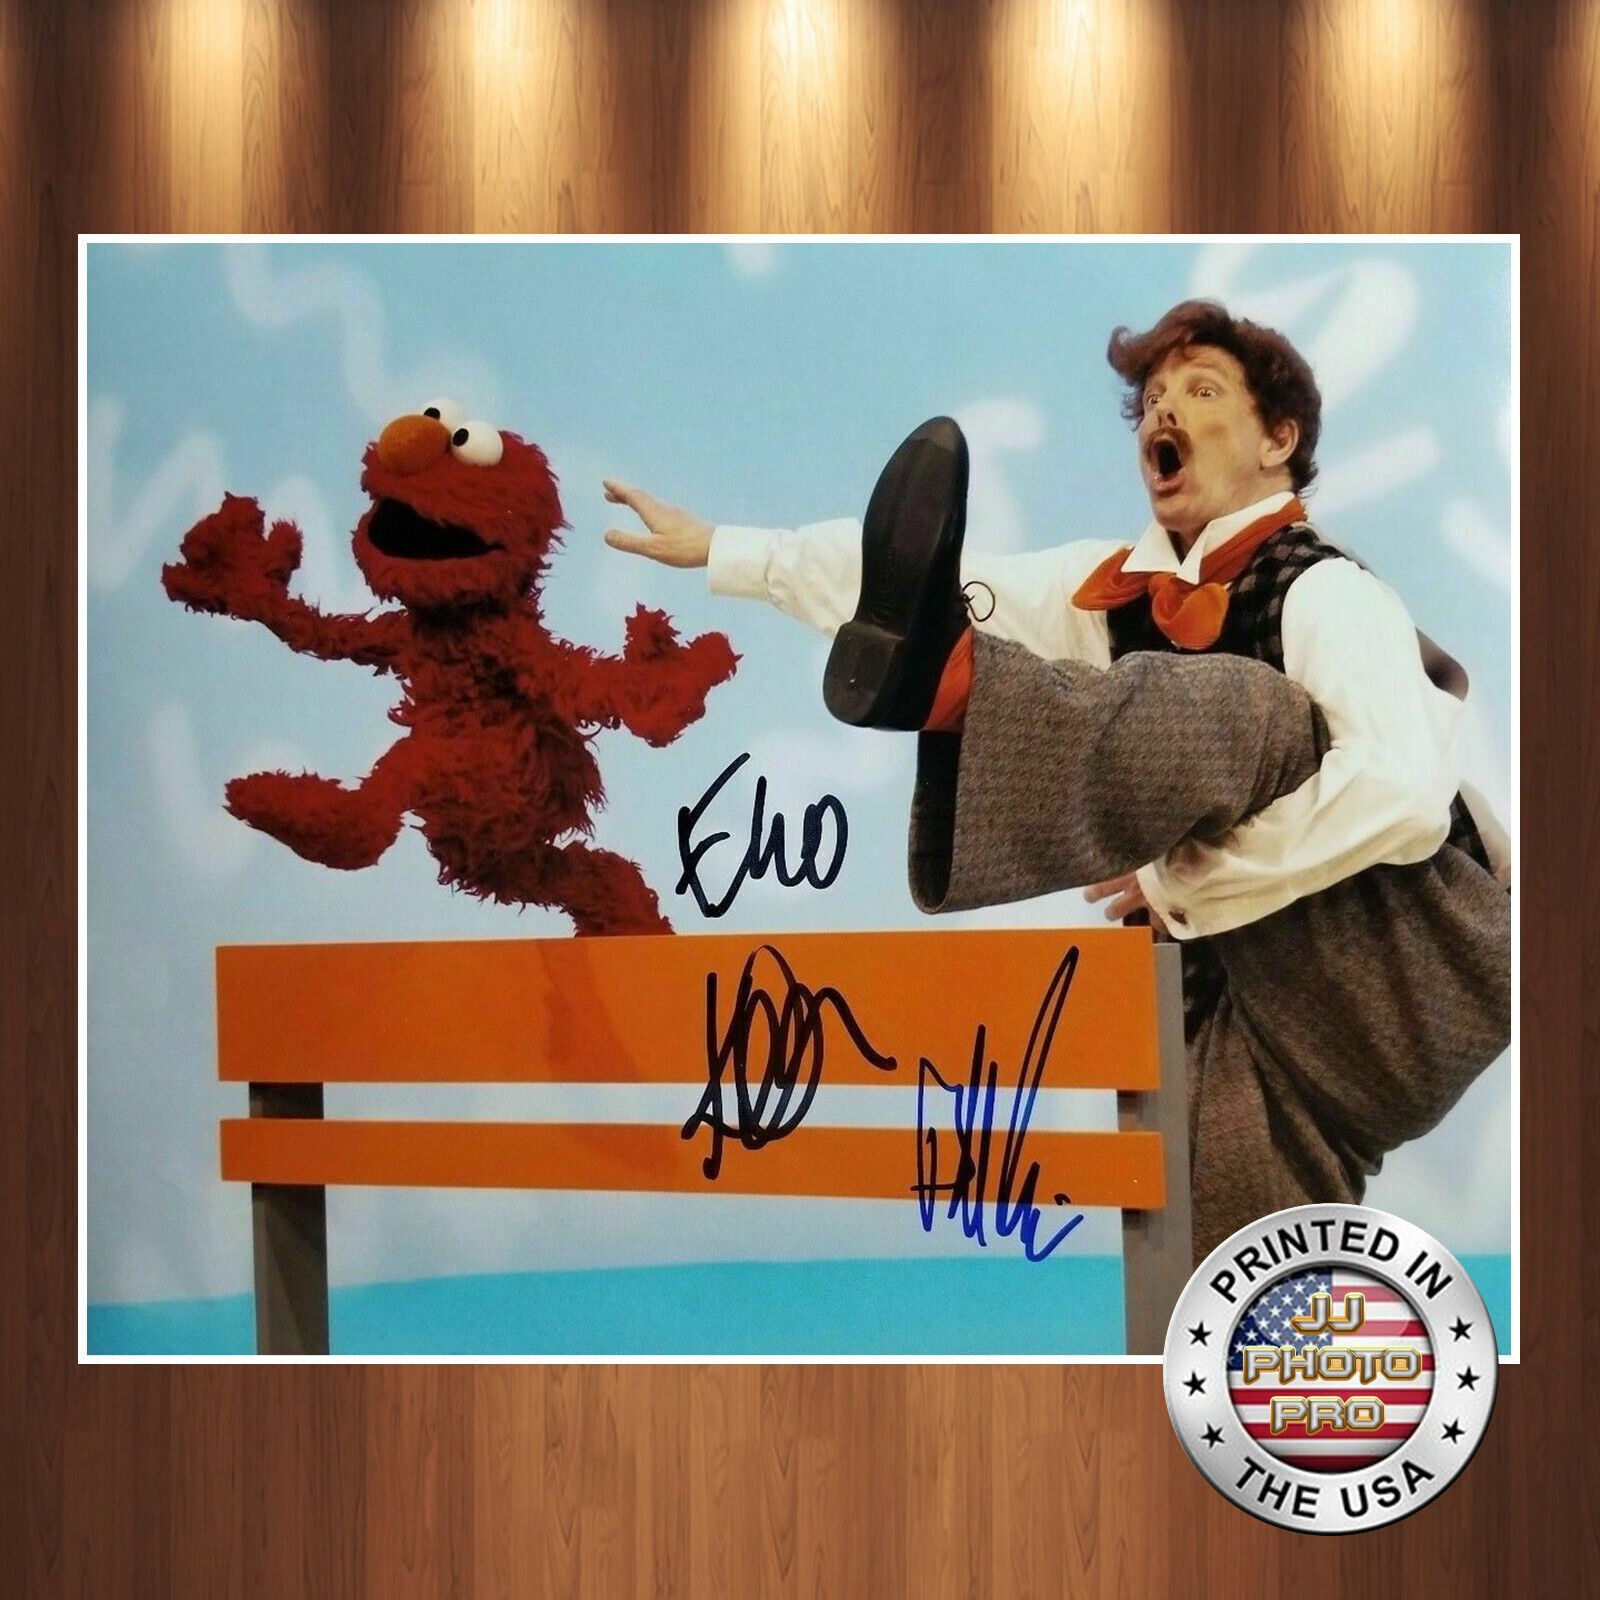 Elmo Clash Irwin Autographed Signed 8x10 Photo Poster painting (Sesame Street) REPRINT